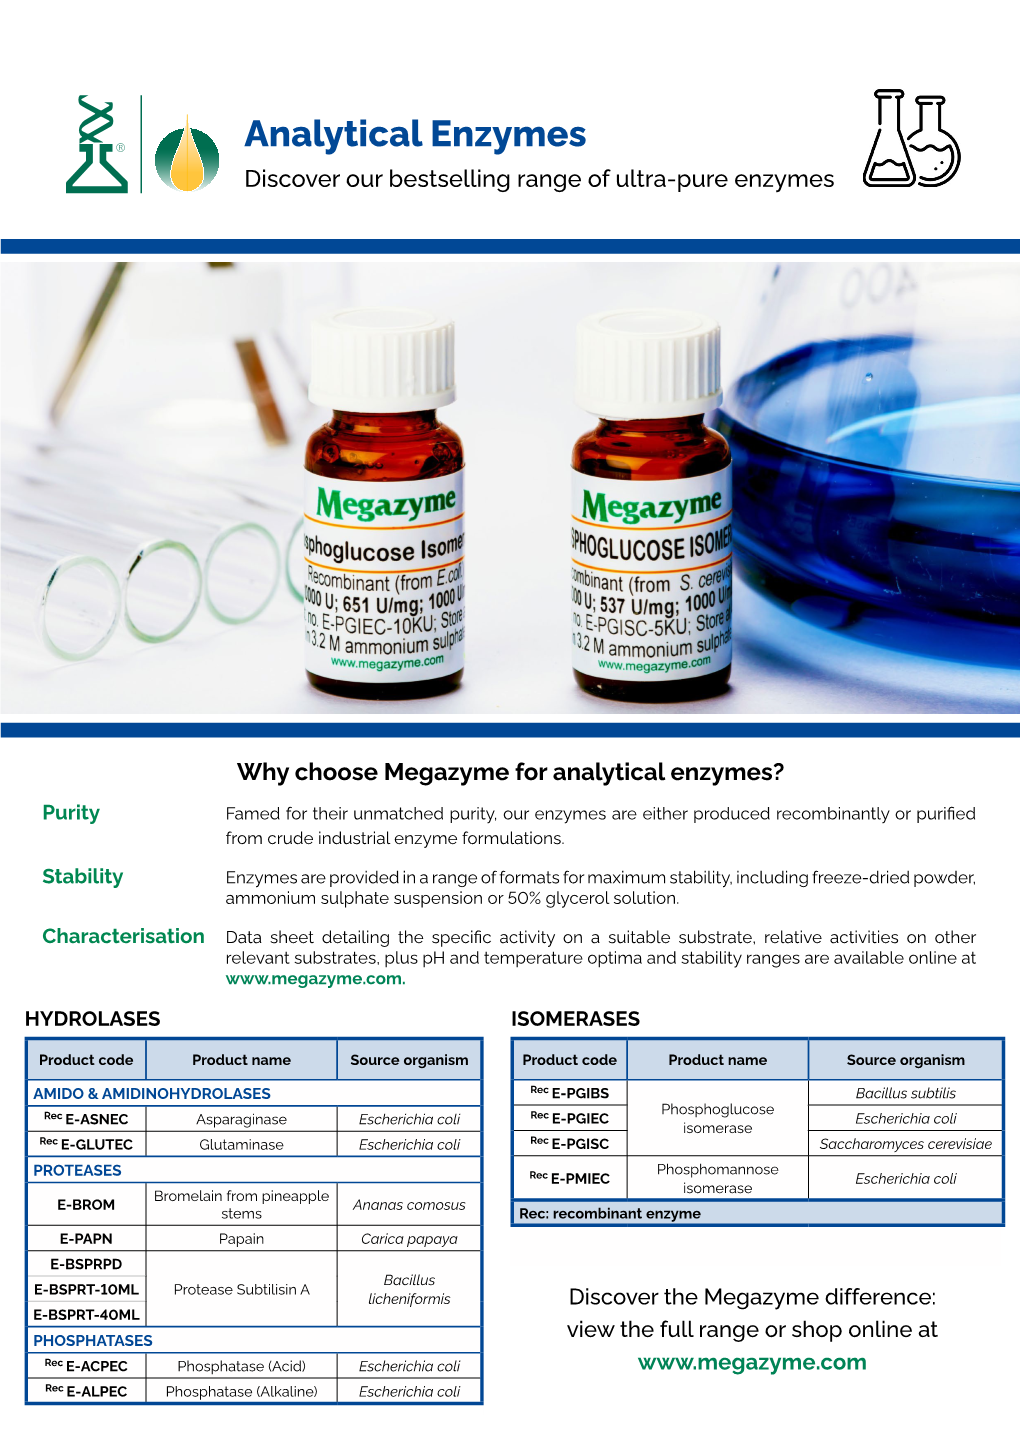 Analytical Enzymes Discover Our Bestselling Range of Ultra-Pure Enzymes